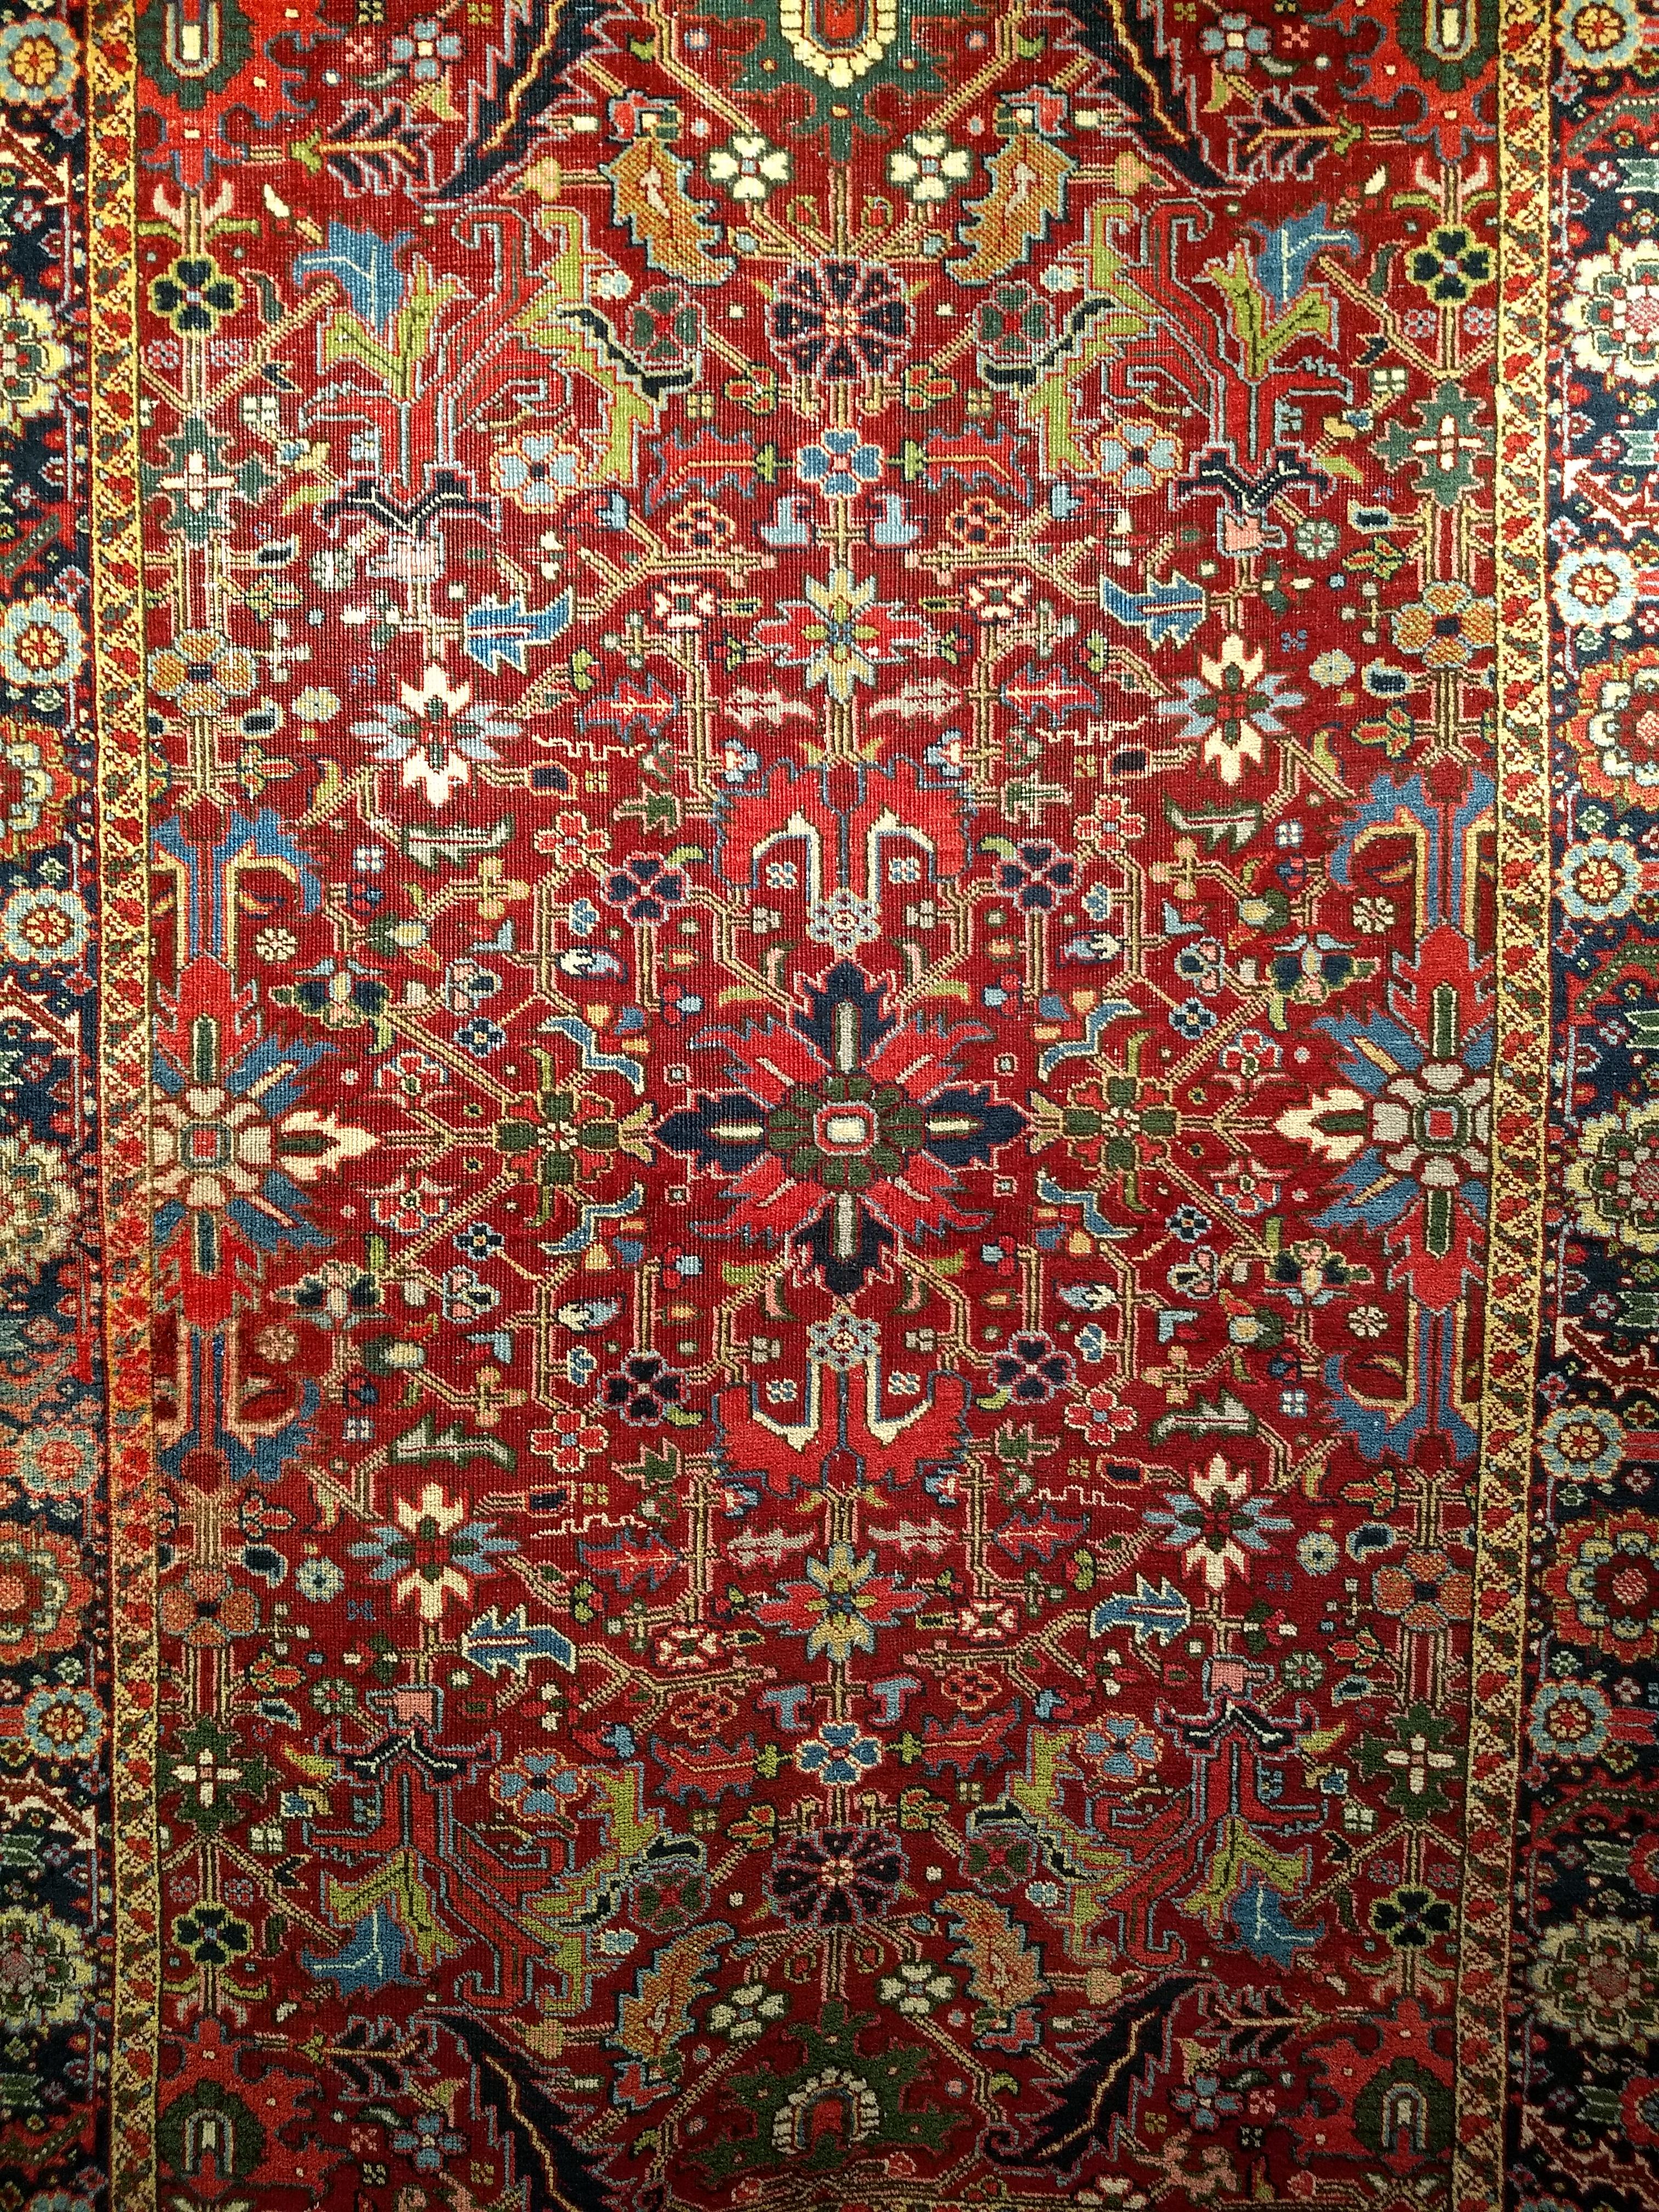  A beautiful and colorful Persian Heriz Serapi from the early 1900s.  The rug has a special uniqueness in having an allover design, and wonderful colors which makes this an extremely rare and very desirable room-size rug.  The beautiful Heriz Serapi